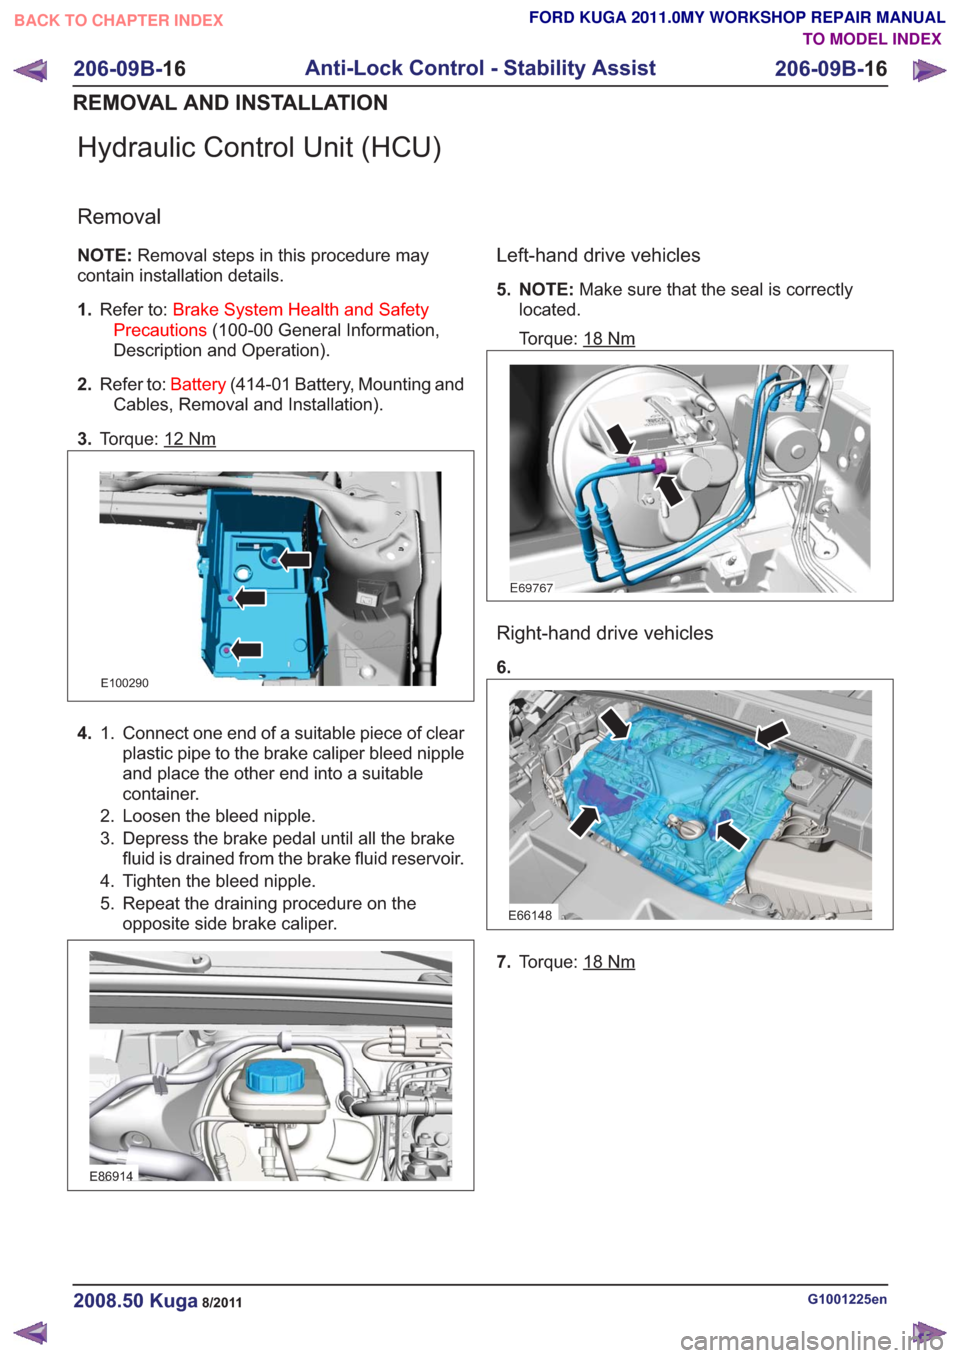 FORD KUGA 2011 1.G Owners Manual Hydraulic Control Unit (HCU)
Removal
NOTE:Removal steps in this procedure may
contain installation details.
1. Refer to: Brake System Health and Safety
Precautions (100-00 General Information,
Descrip